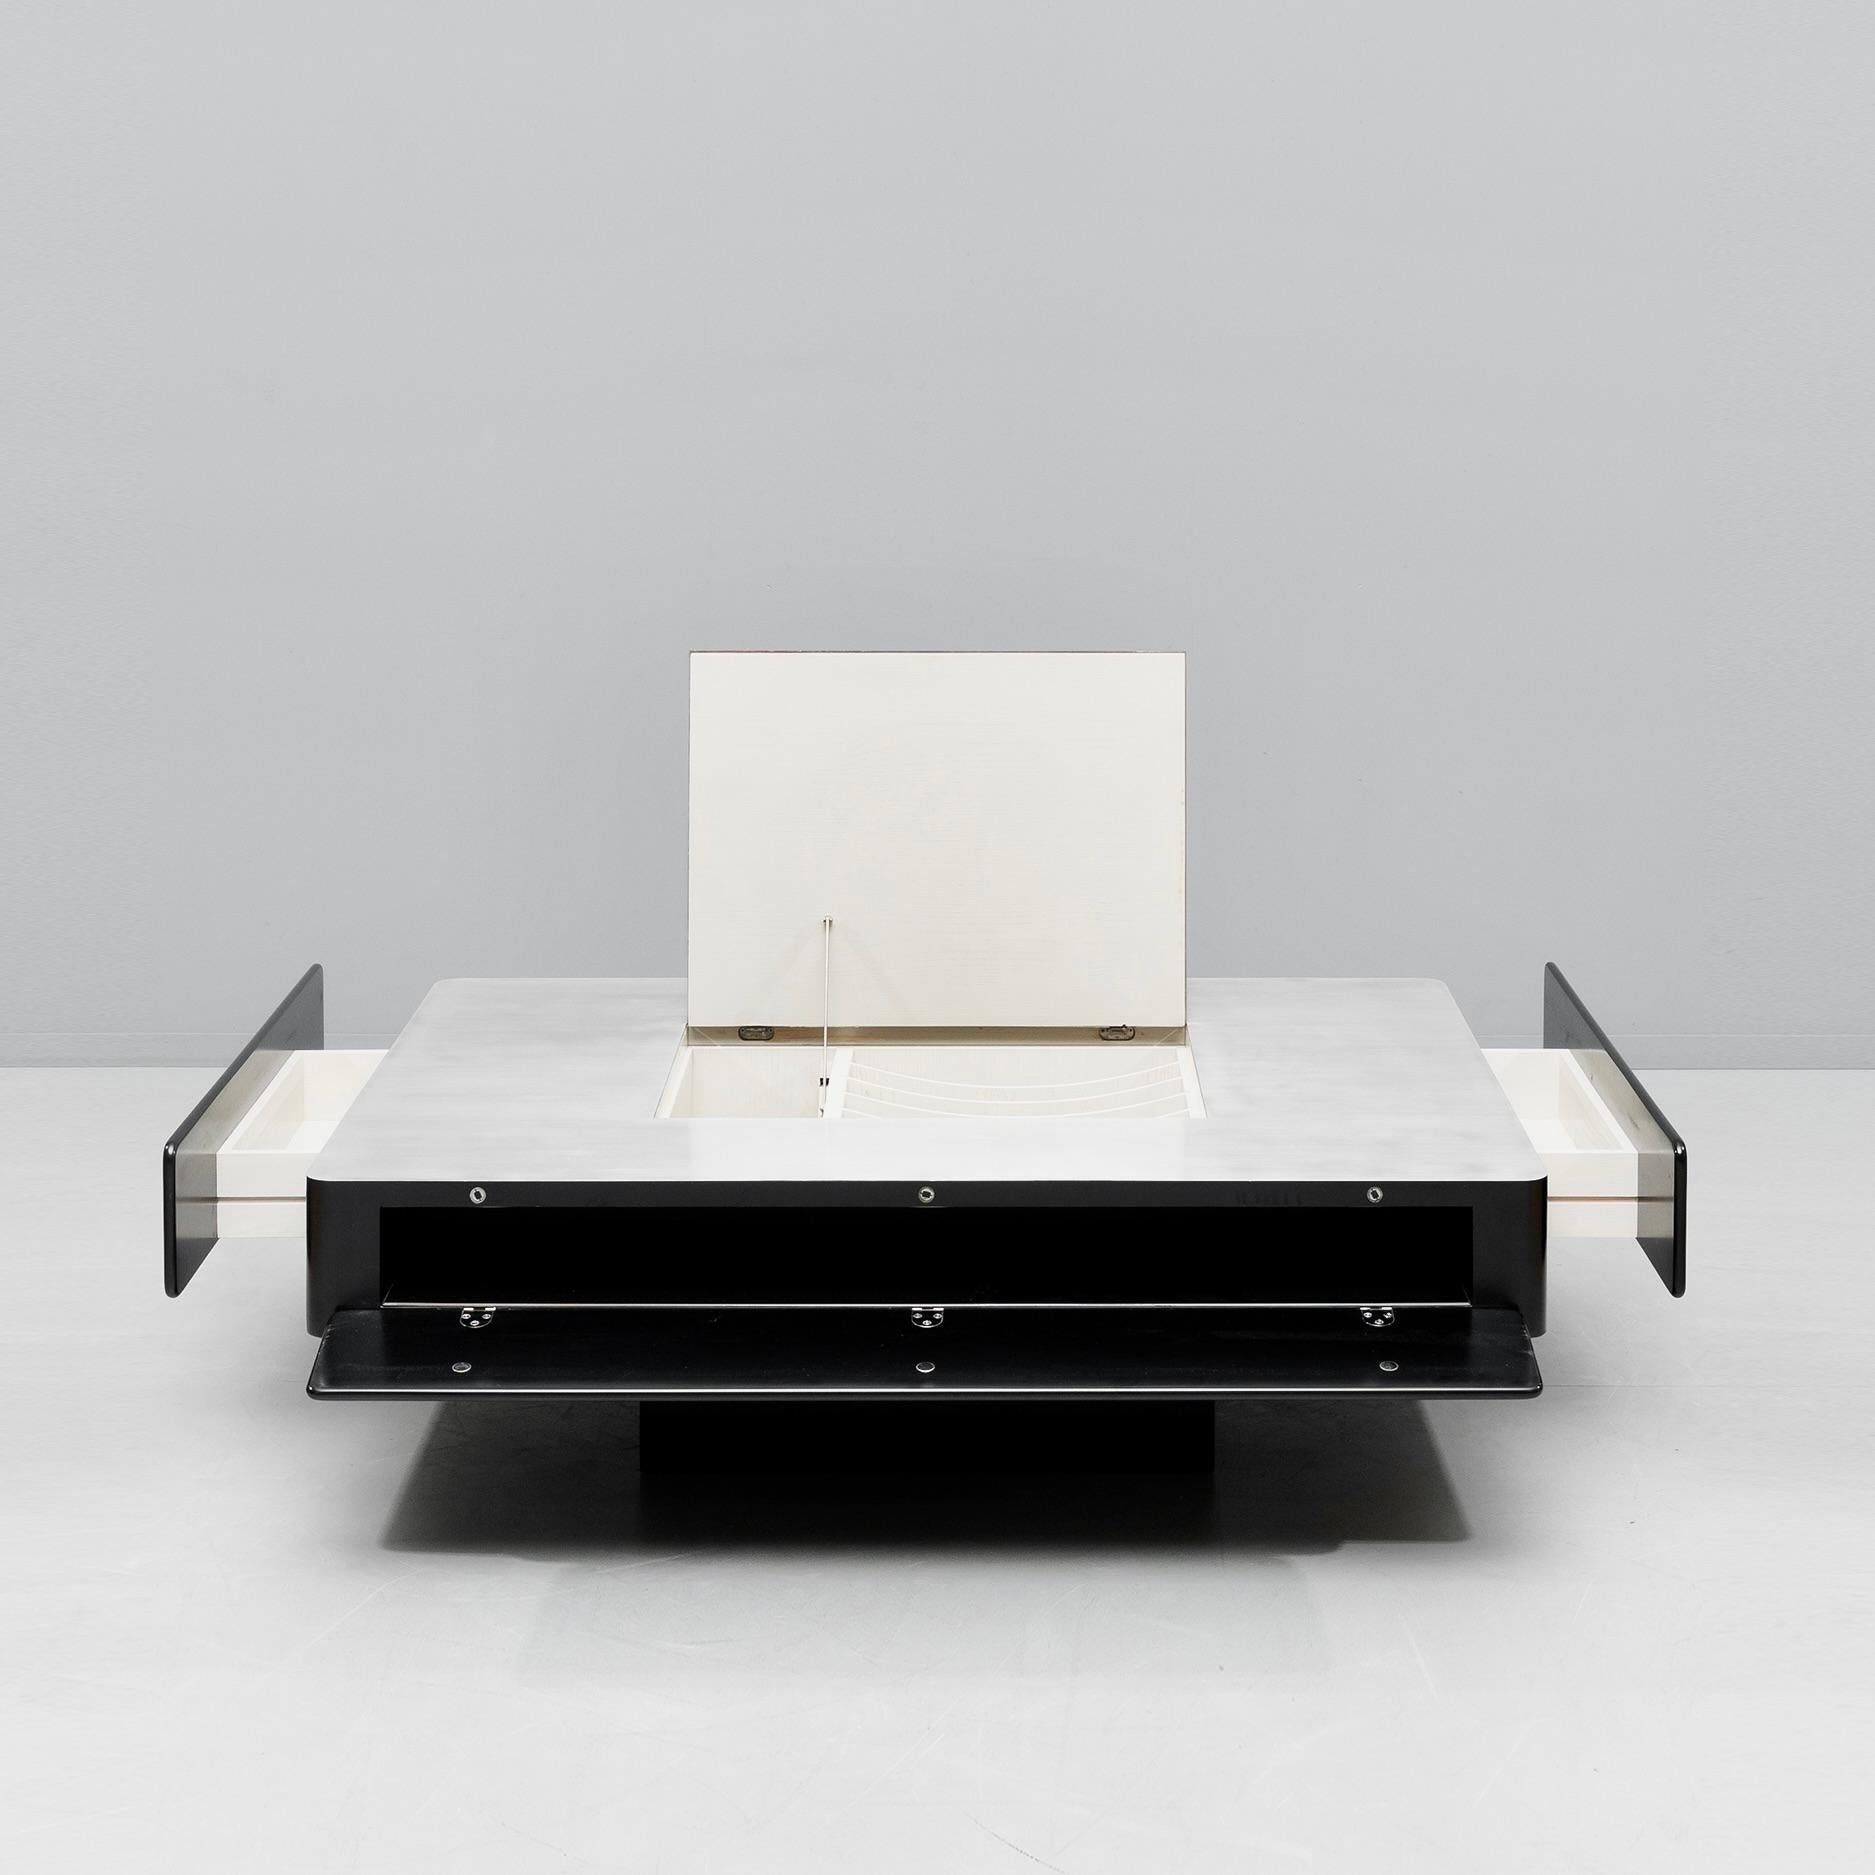 The table is made of black satin lacquered wood with a brushed stainless steel top. The top has a central door, opening to a compartment for music records, bottles, etc.  The door gently shuts with an adjustable damping system. There are two drawers